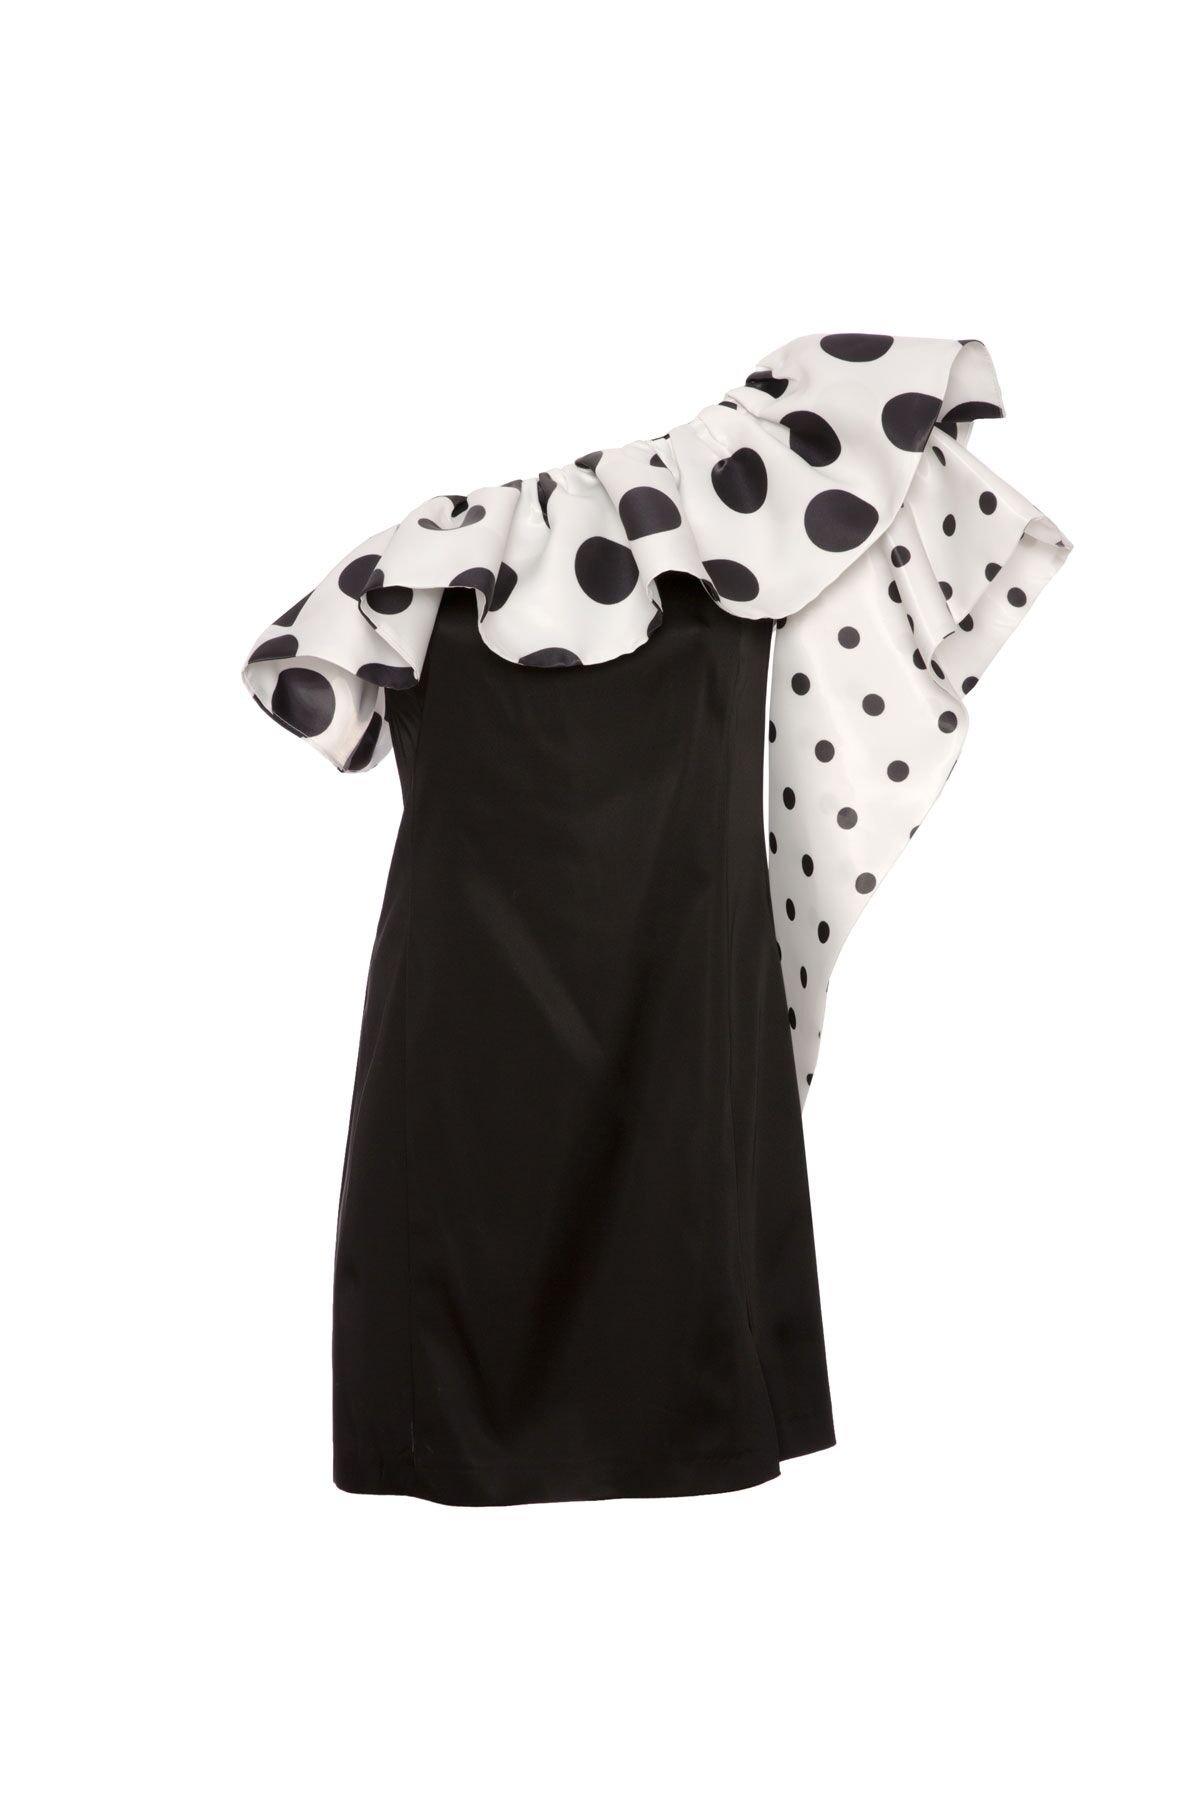 One Shoulder Polka Dot White Dress With Flounce Sleeves Detailed